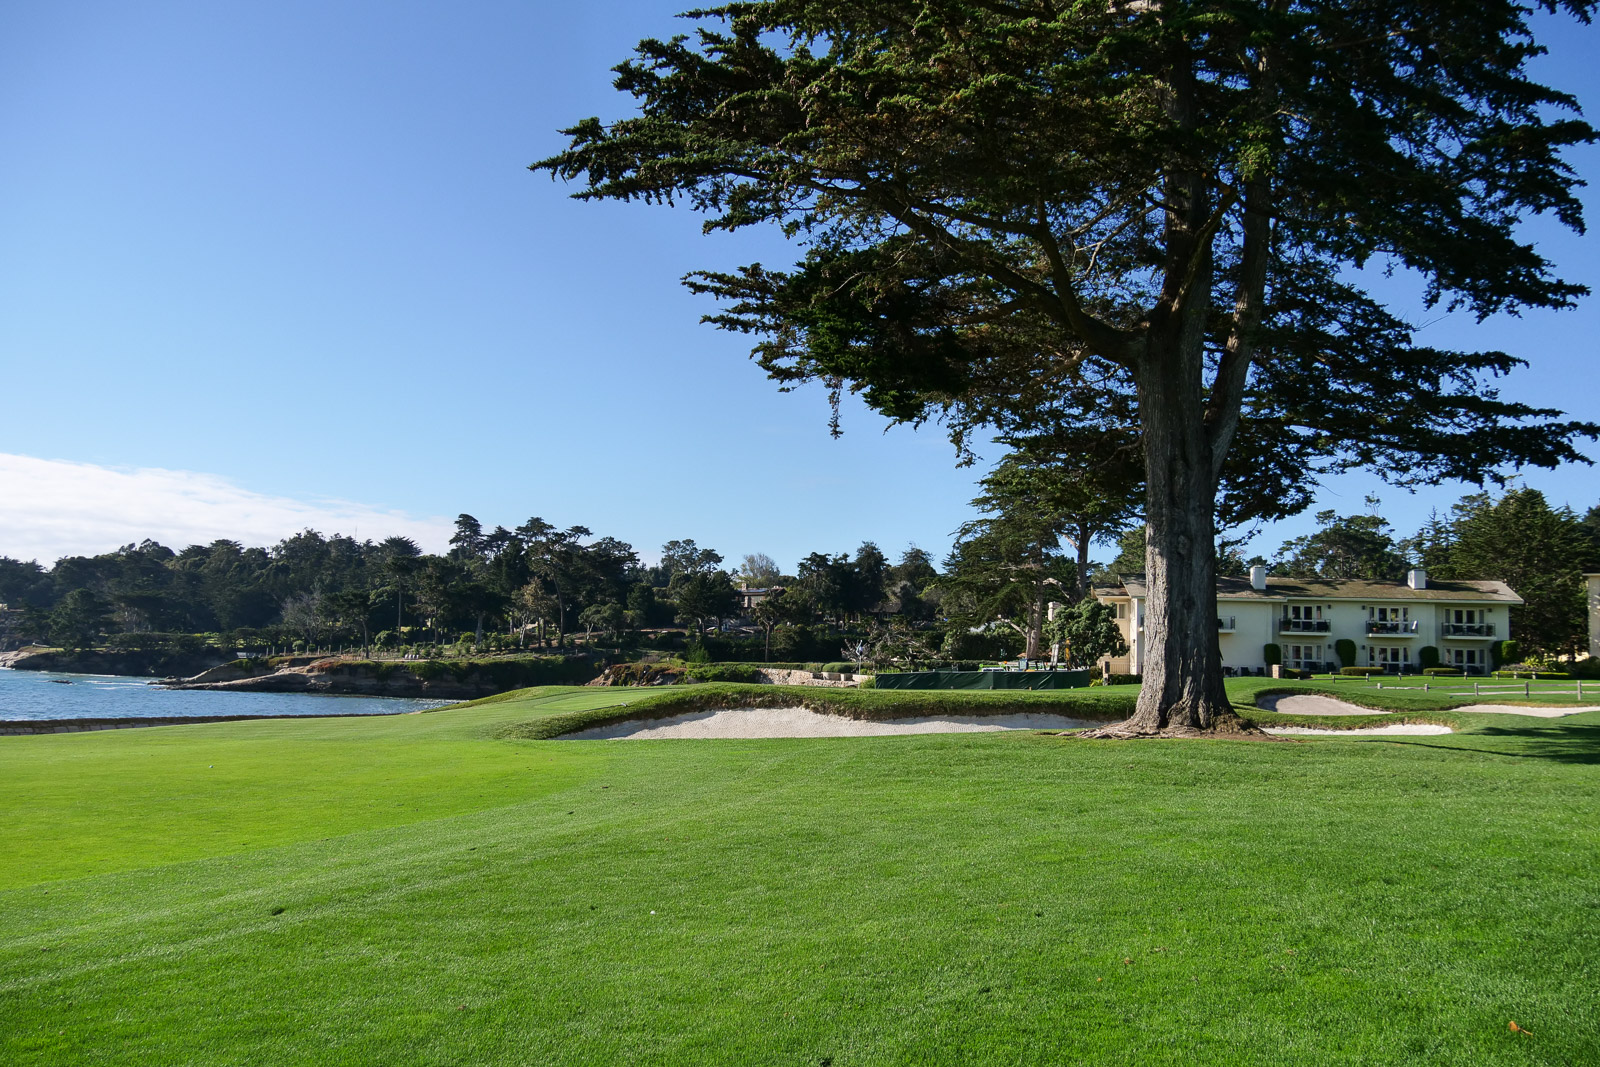 Approach on 18 at Pebble.